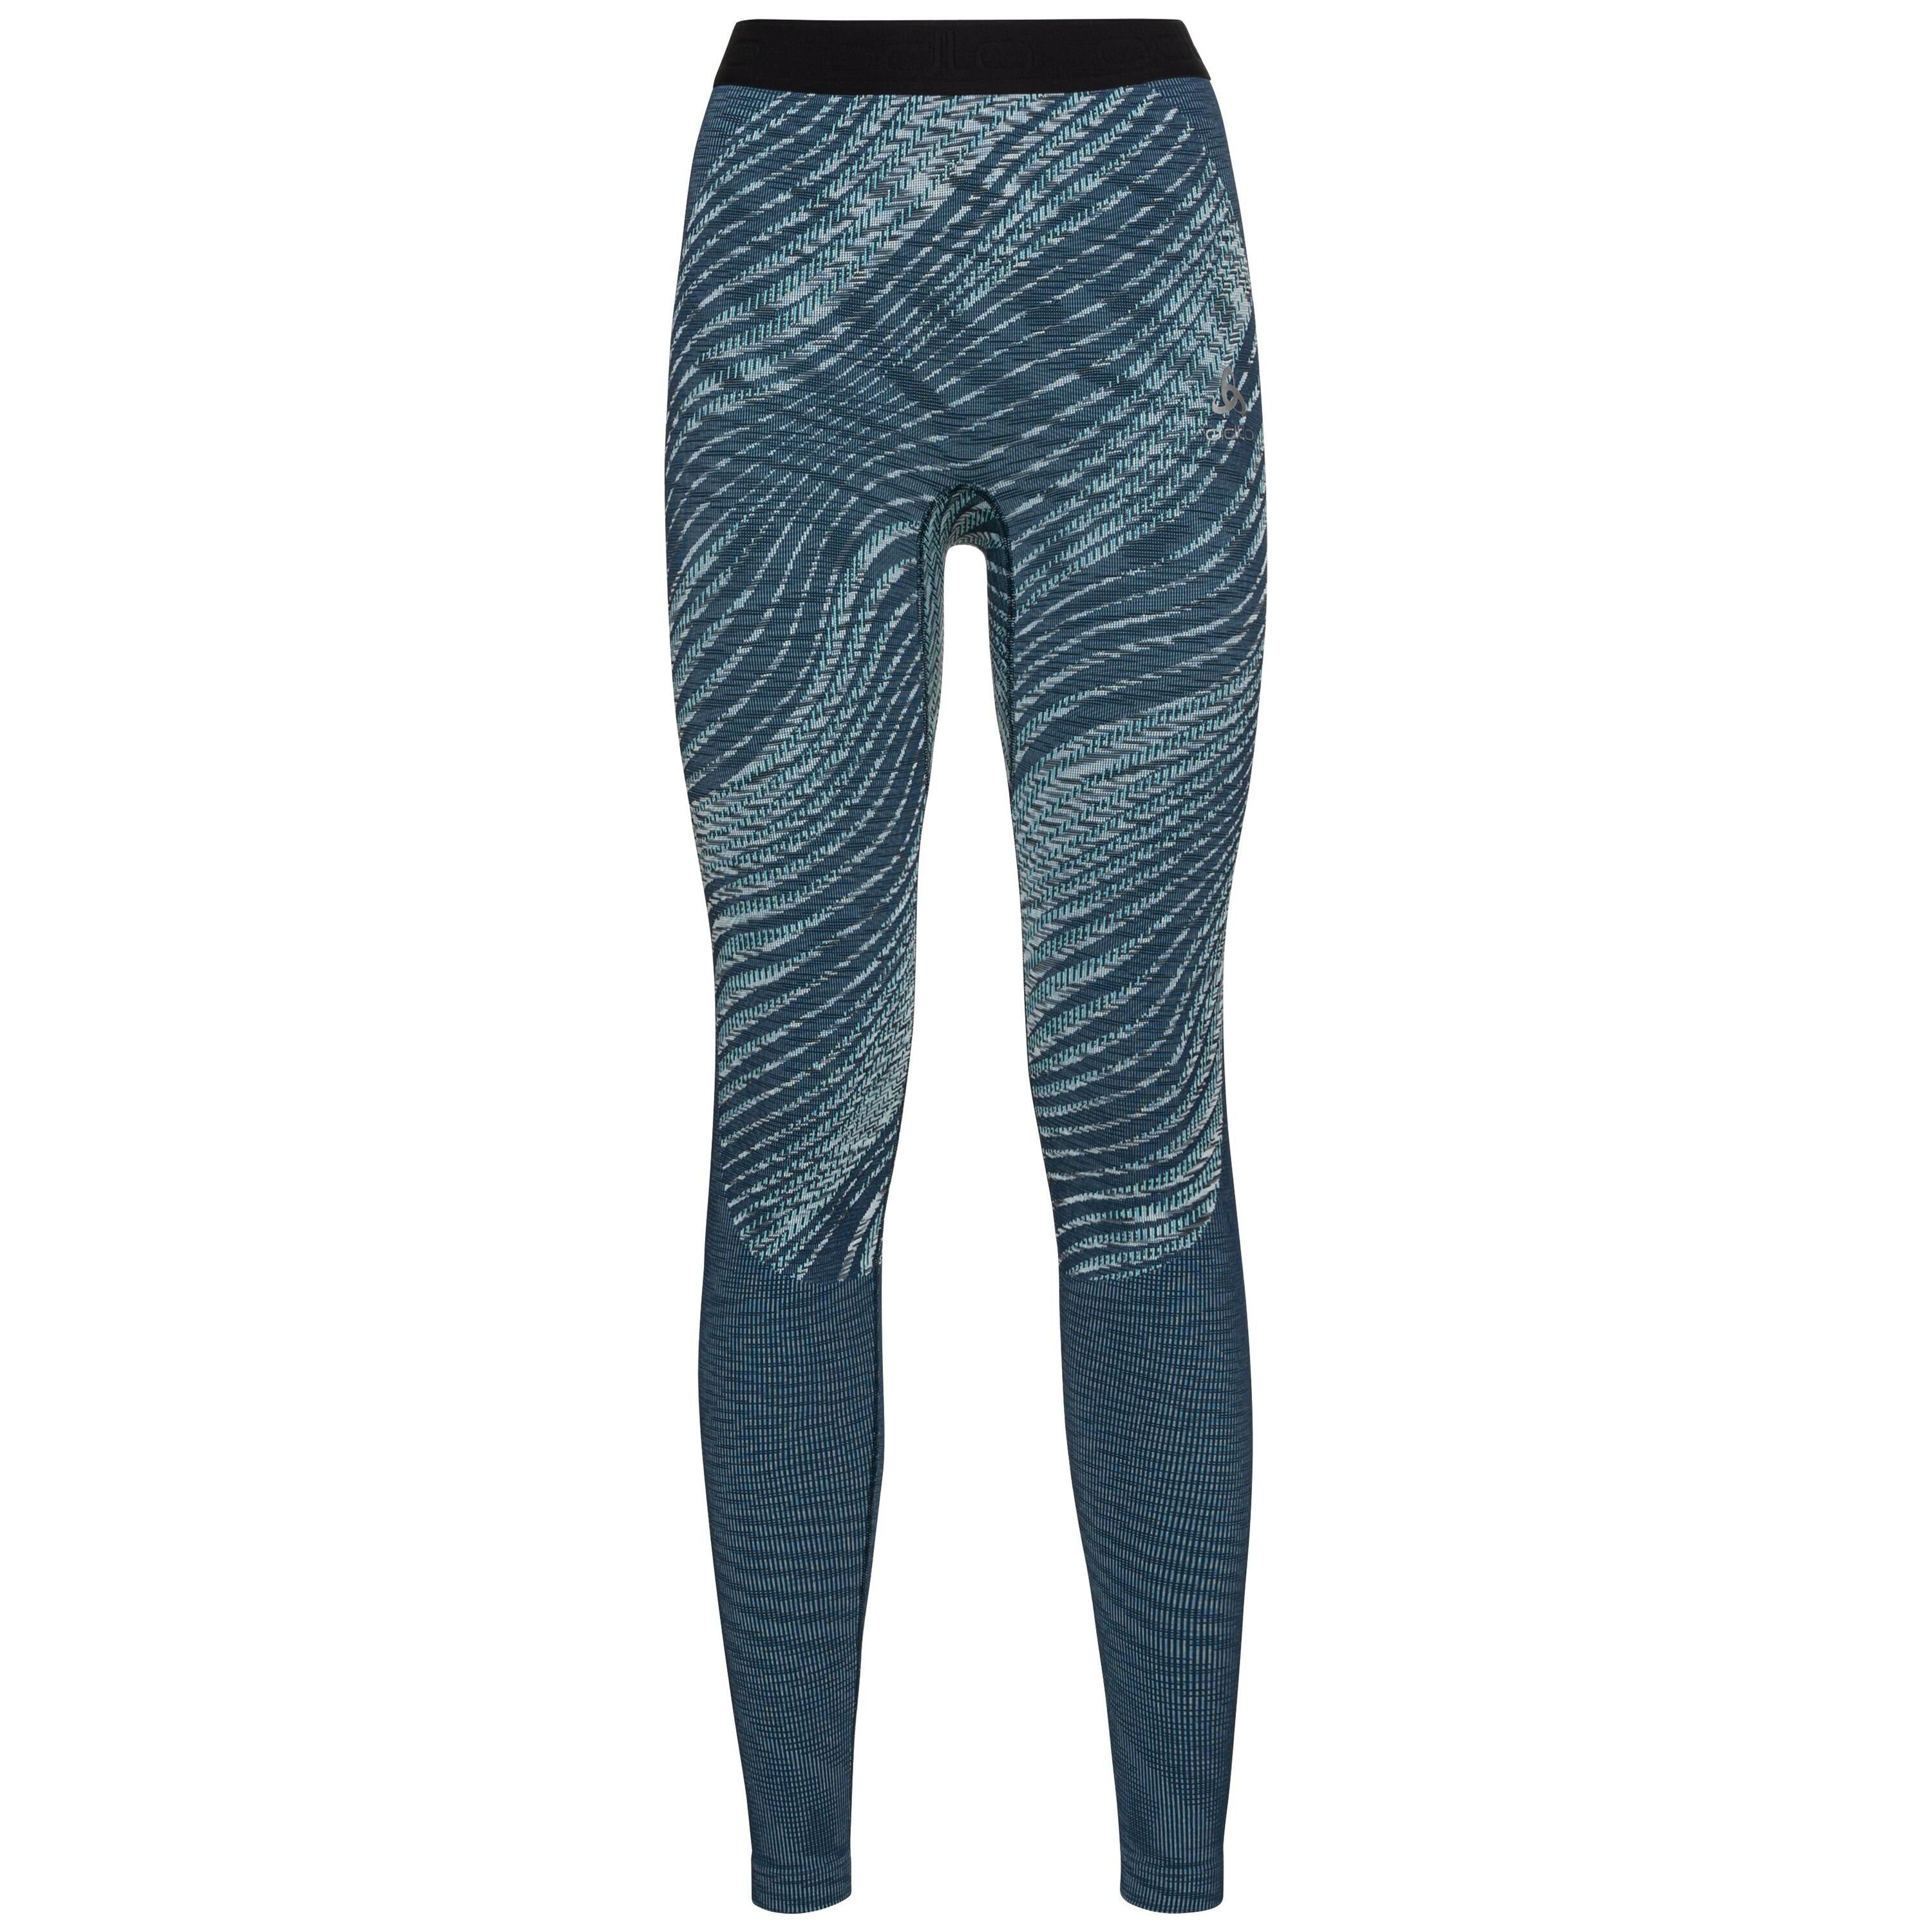 Odlo Funktionstights Blackcomb Eco Tights blue wing teal - space dye